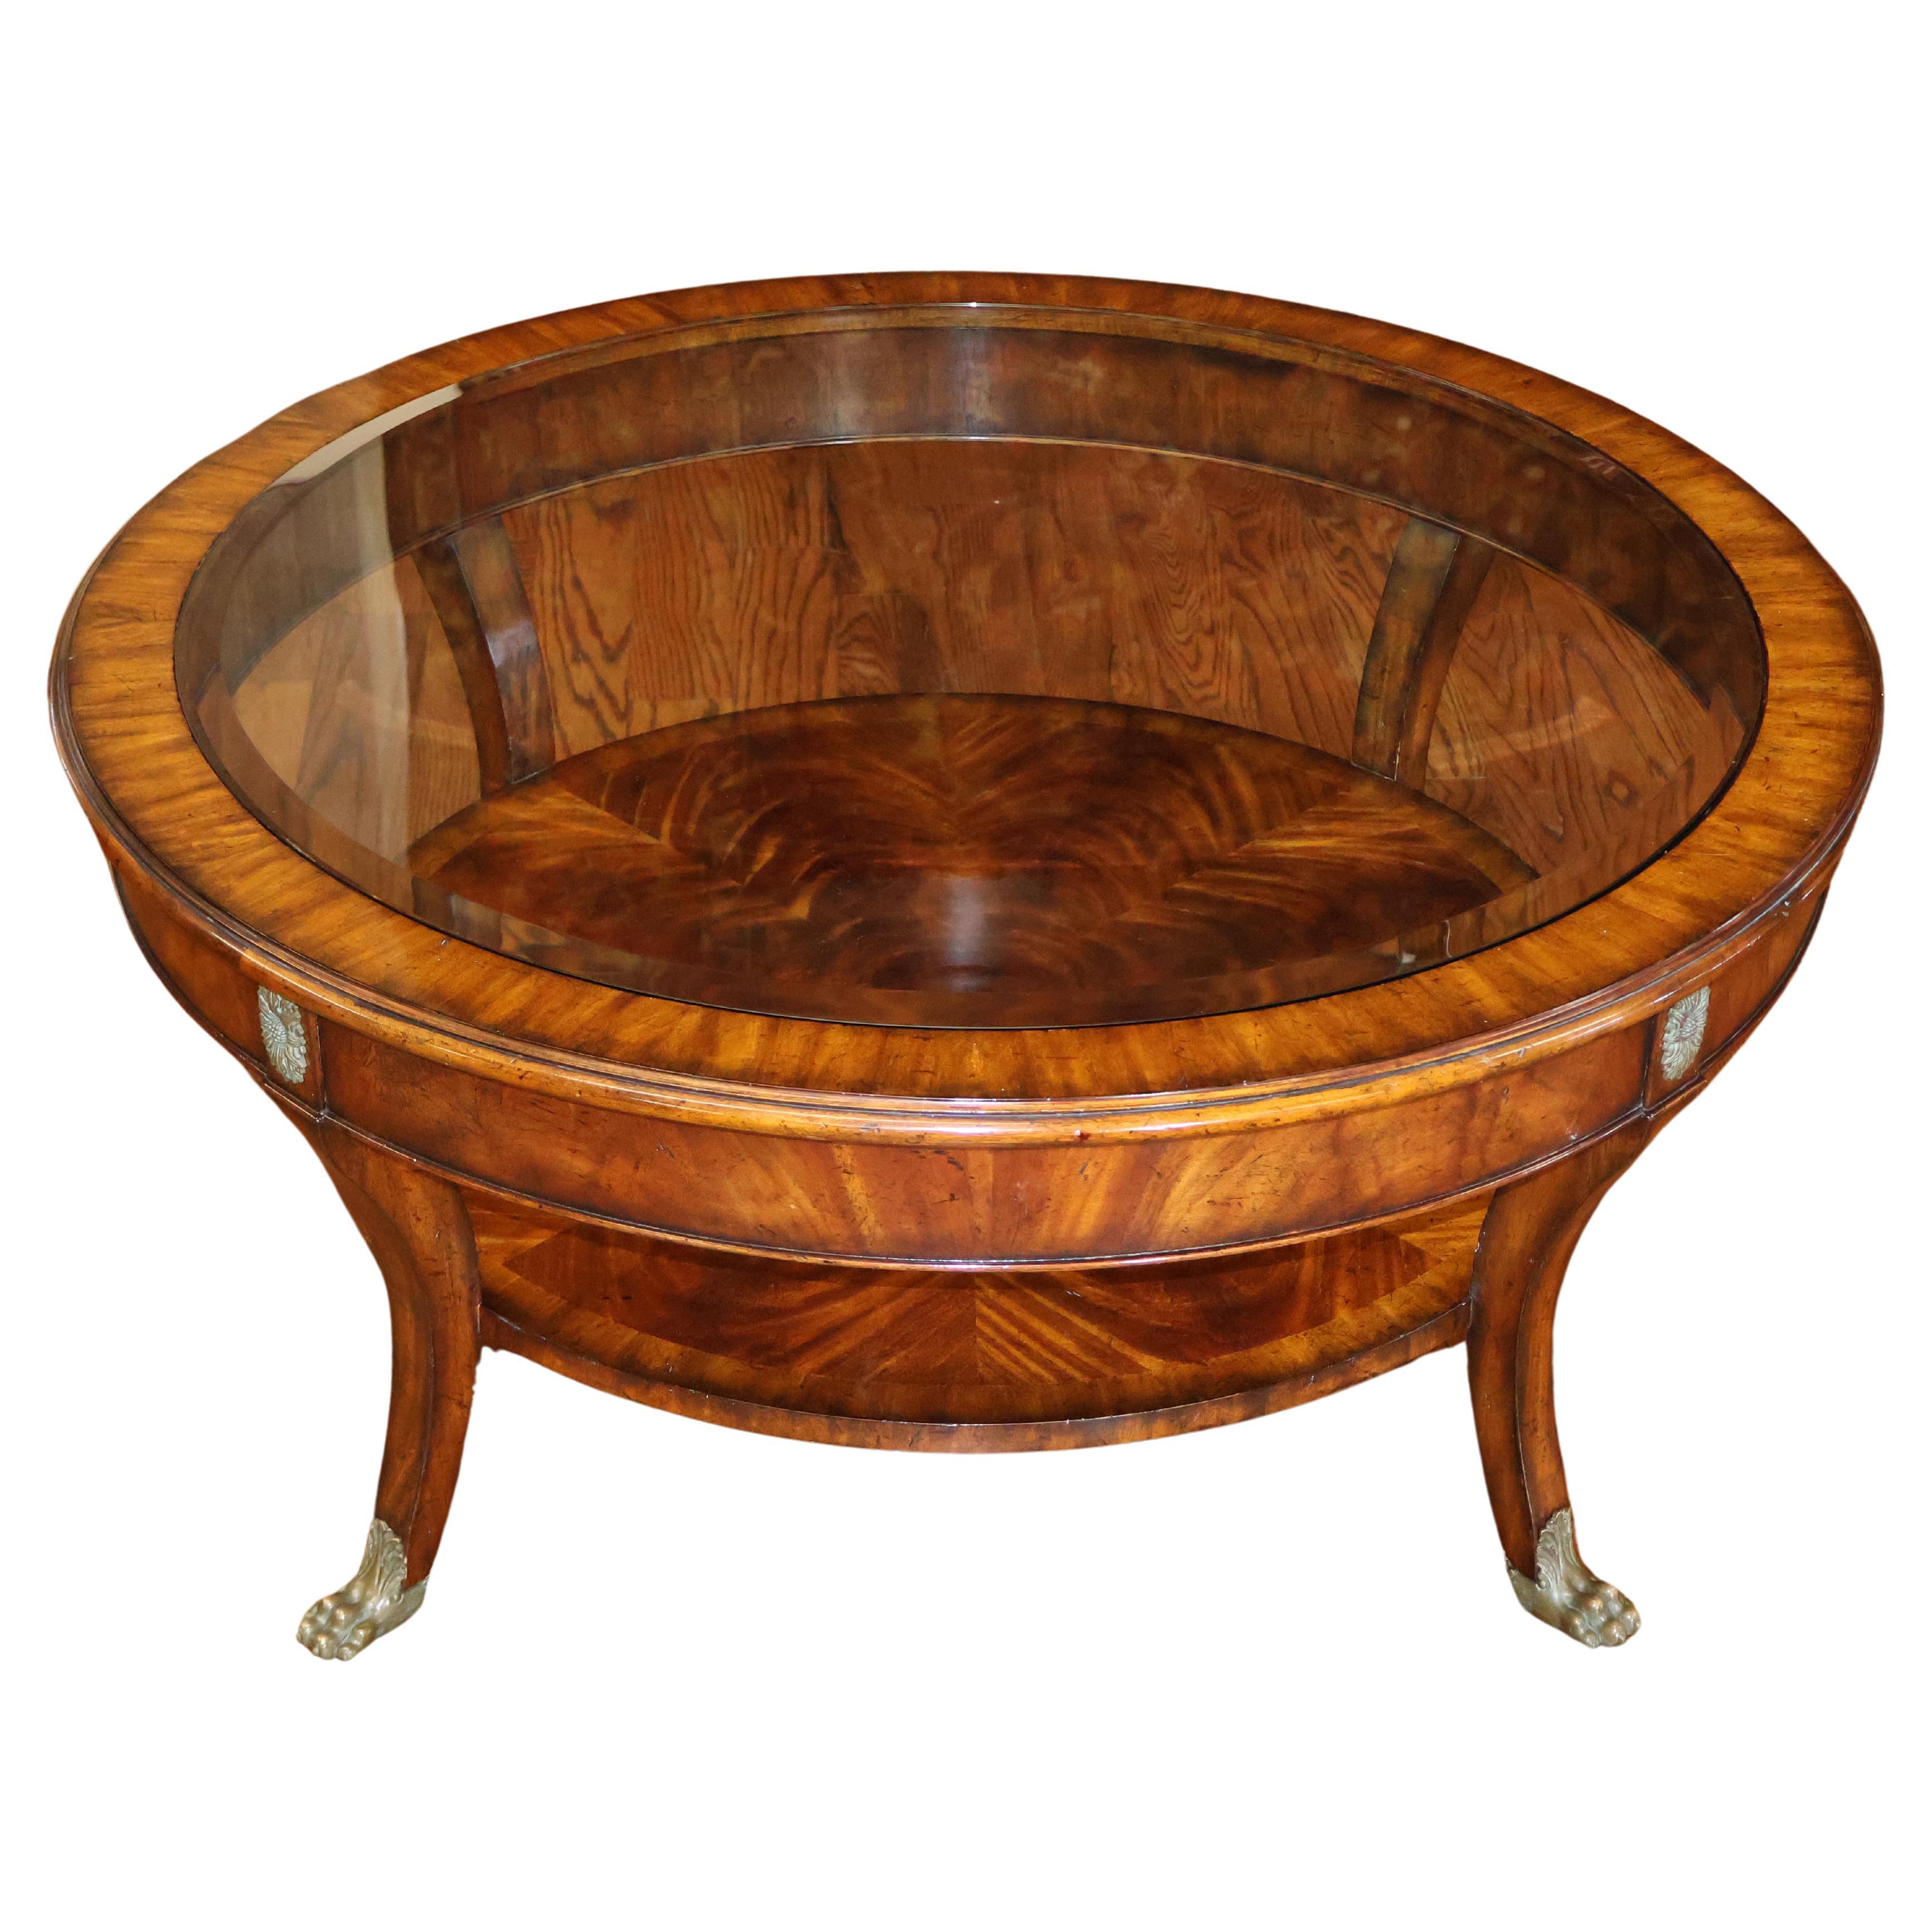 Maitland Smith Regency Style Mahogany Round Glass Top Cocktail Coffee Table 